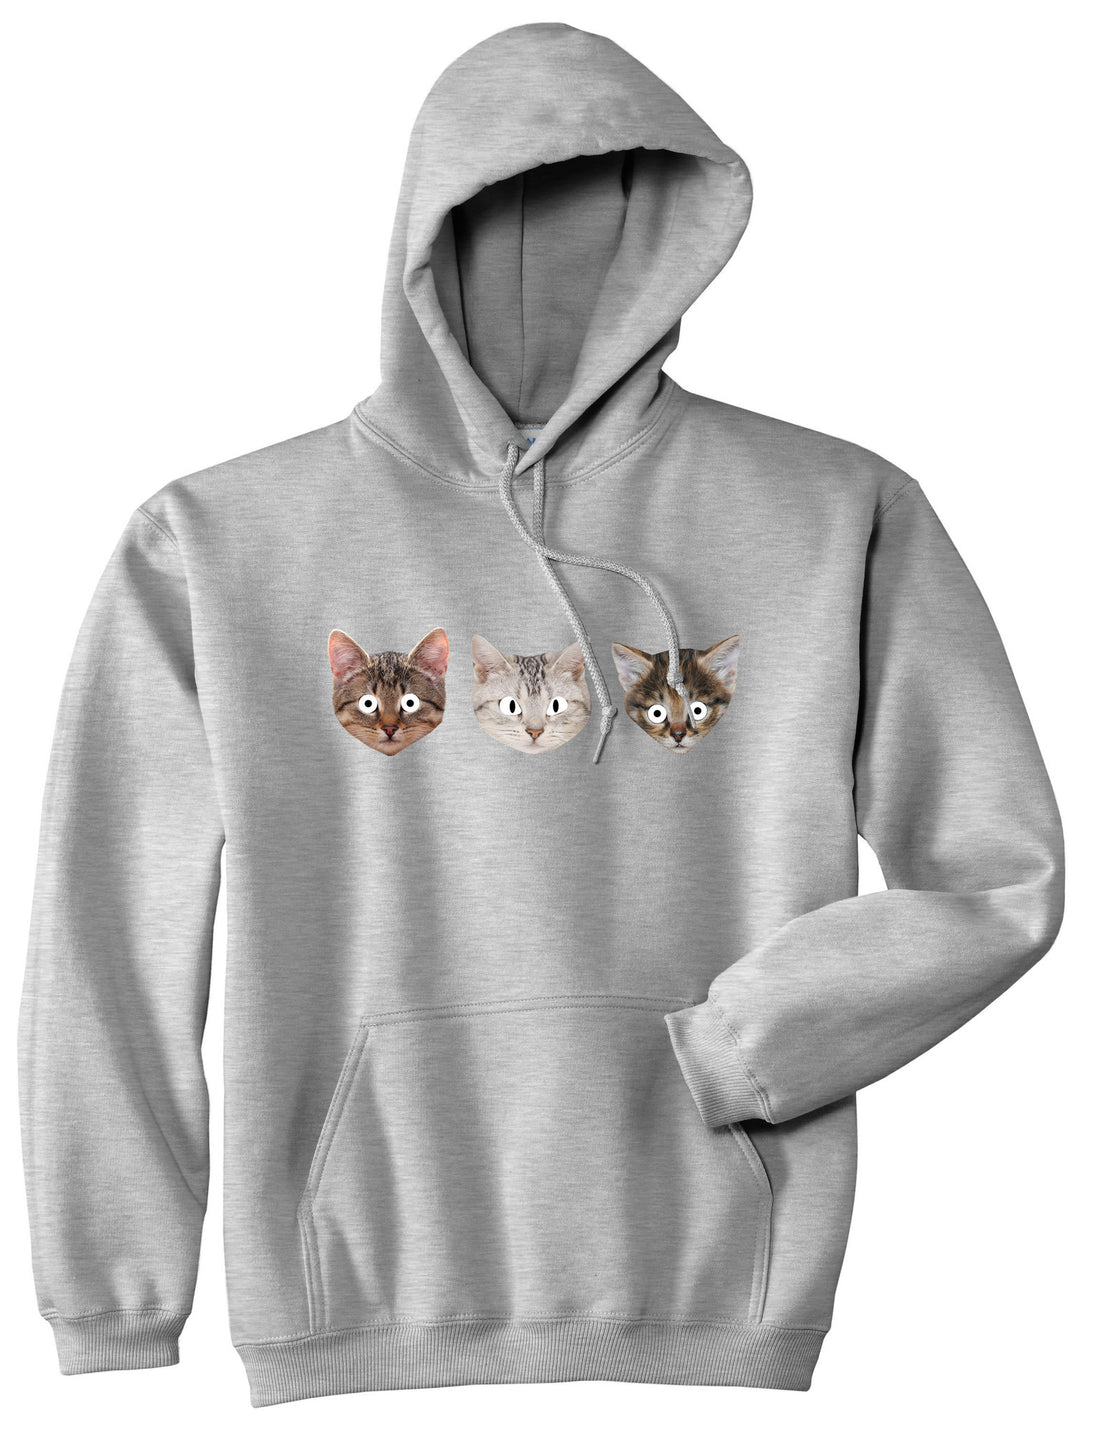 Cats Crazy Kittens Pullover Hoodie in Grey By Kings Of NY